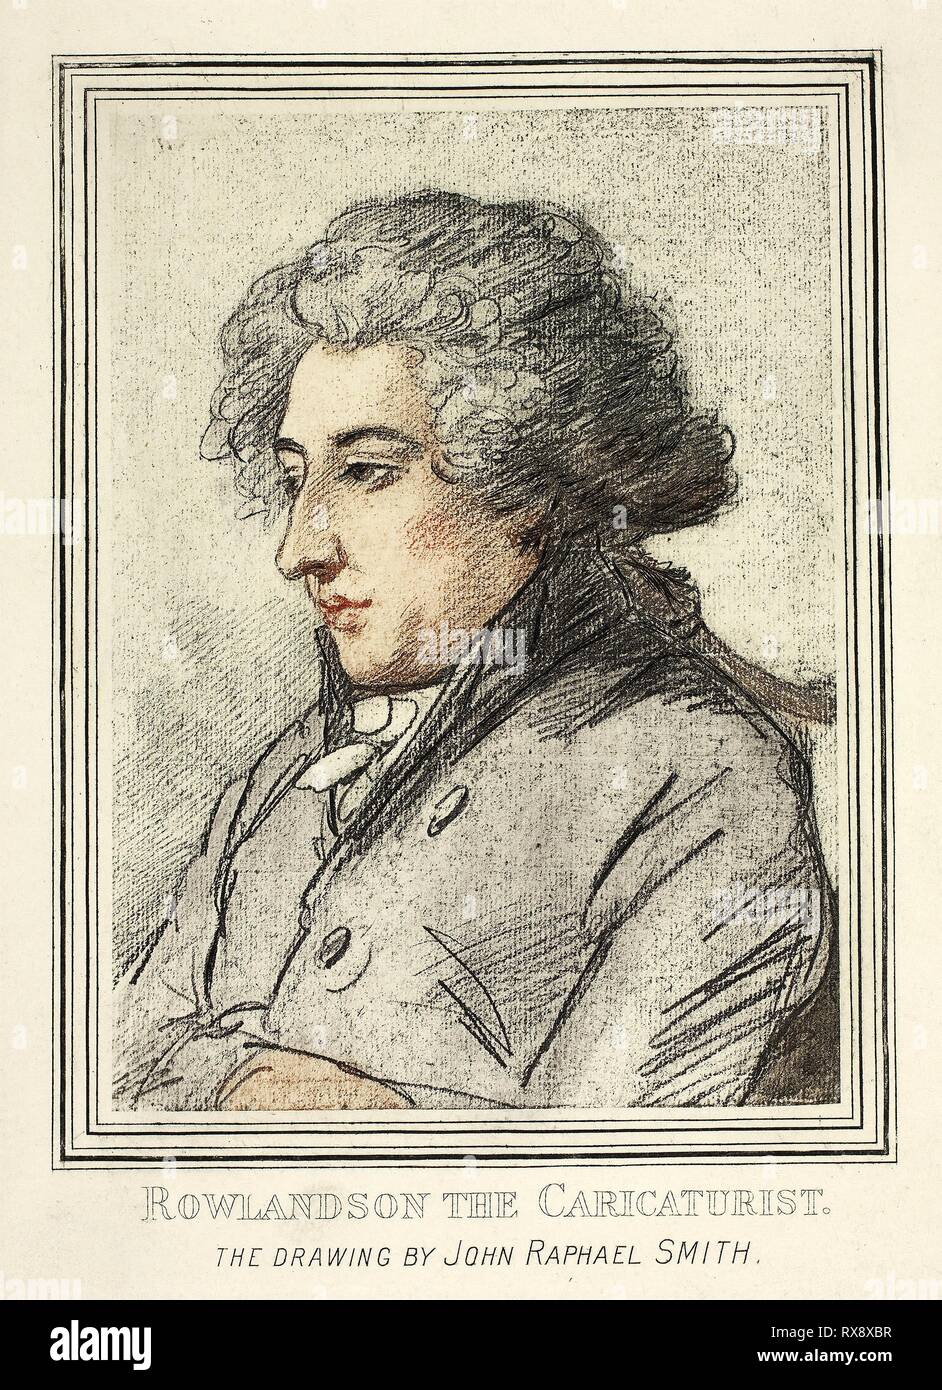 Portrait of Thomas Rowlandson, from Reproductions of Drawings by Old Masters in the British Museum. After John Raphael Smith (English, 1751-1812). Date: 1894. Dimensions: 152 × 203 mm. Color photographic reproduction on ivory wove paper. Origin: England. Museum: The Chicago Art Institute. Stock Photo